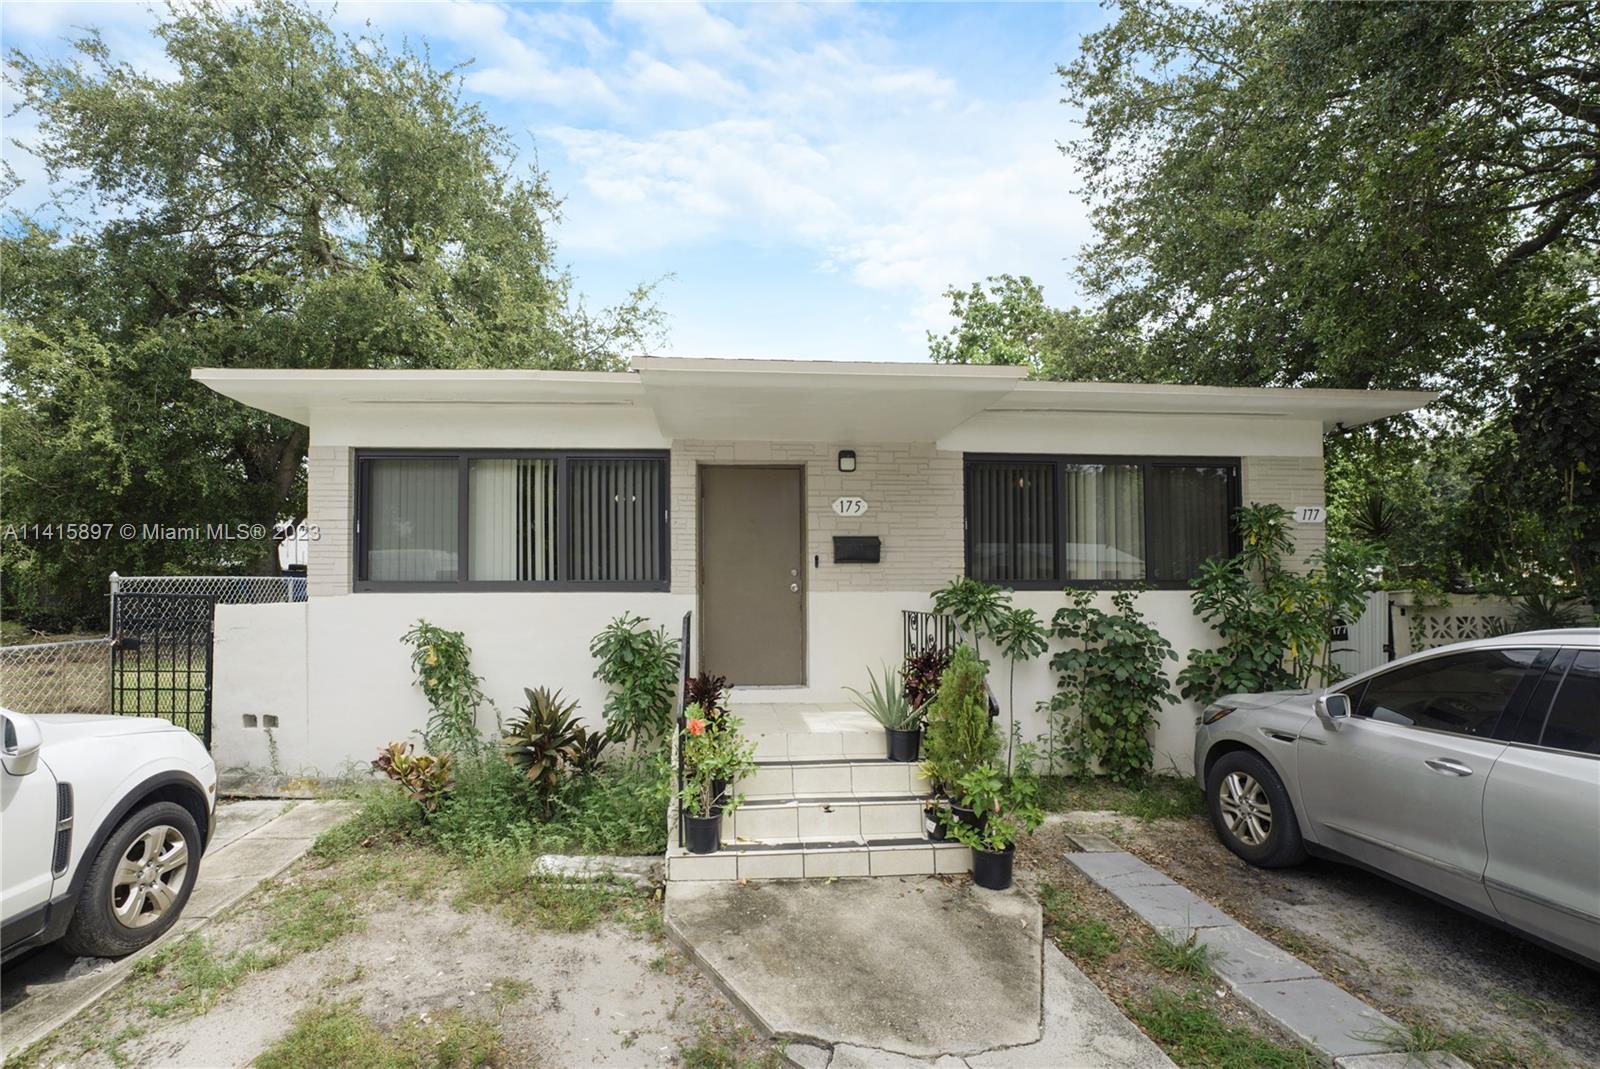 Photo of 175 NW 68th St in Miami, FL